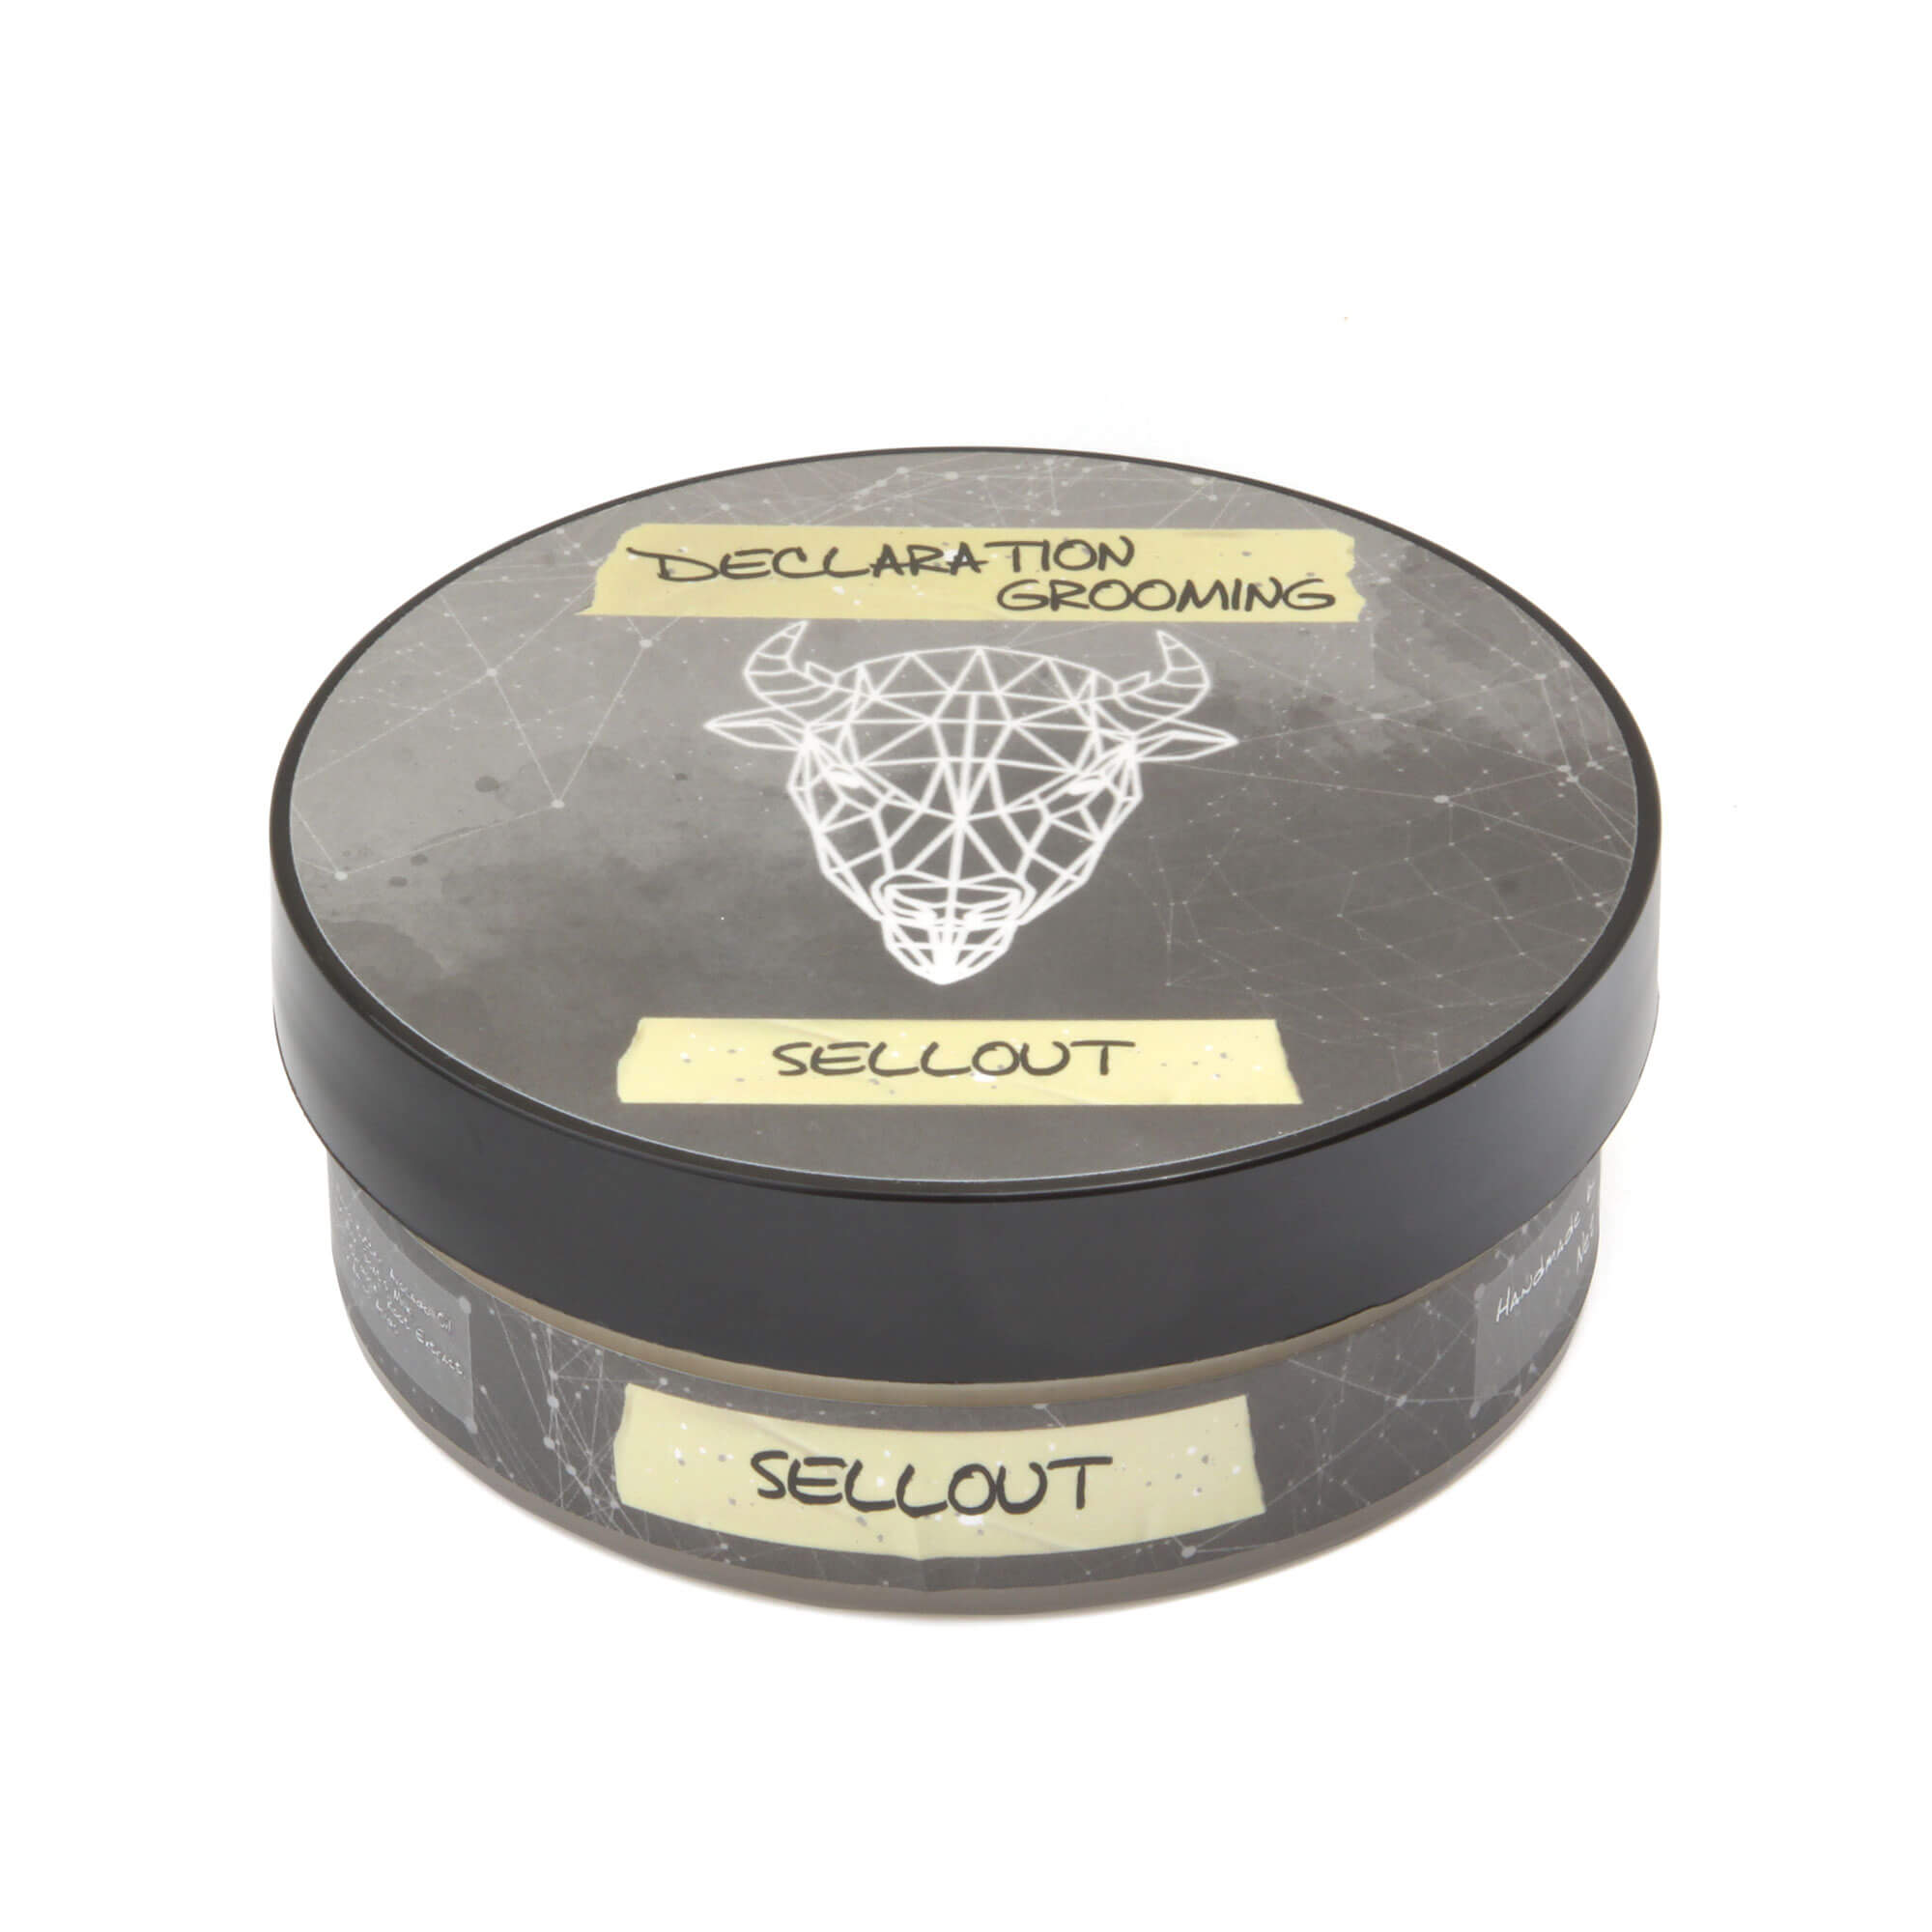 Declaration Grooming Sellout Shaving Soap